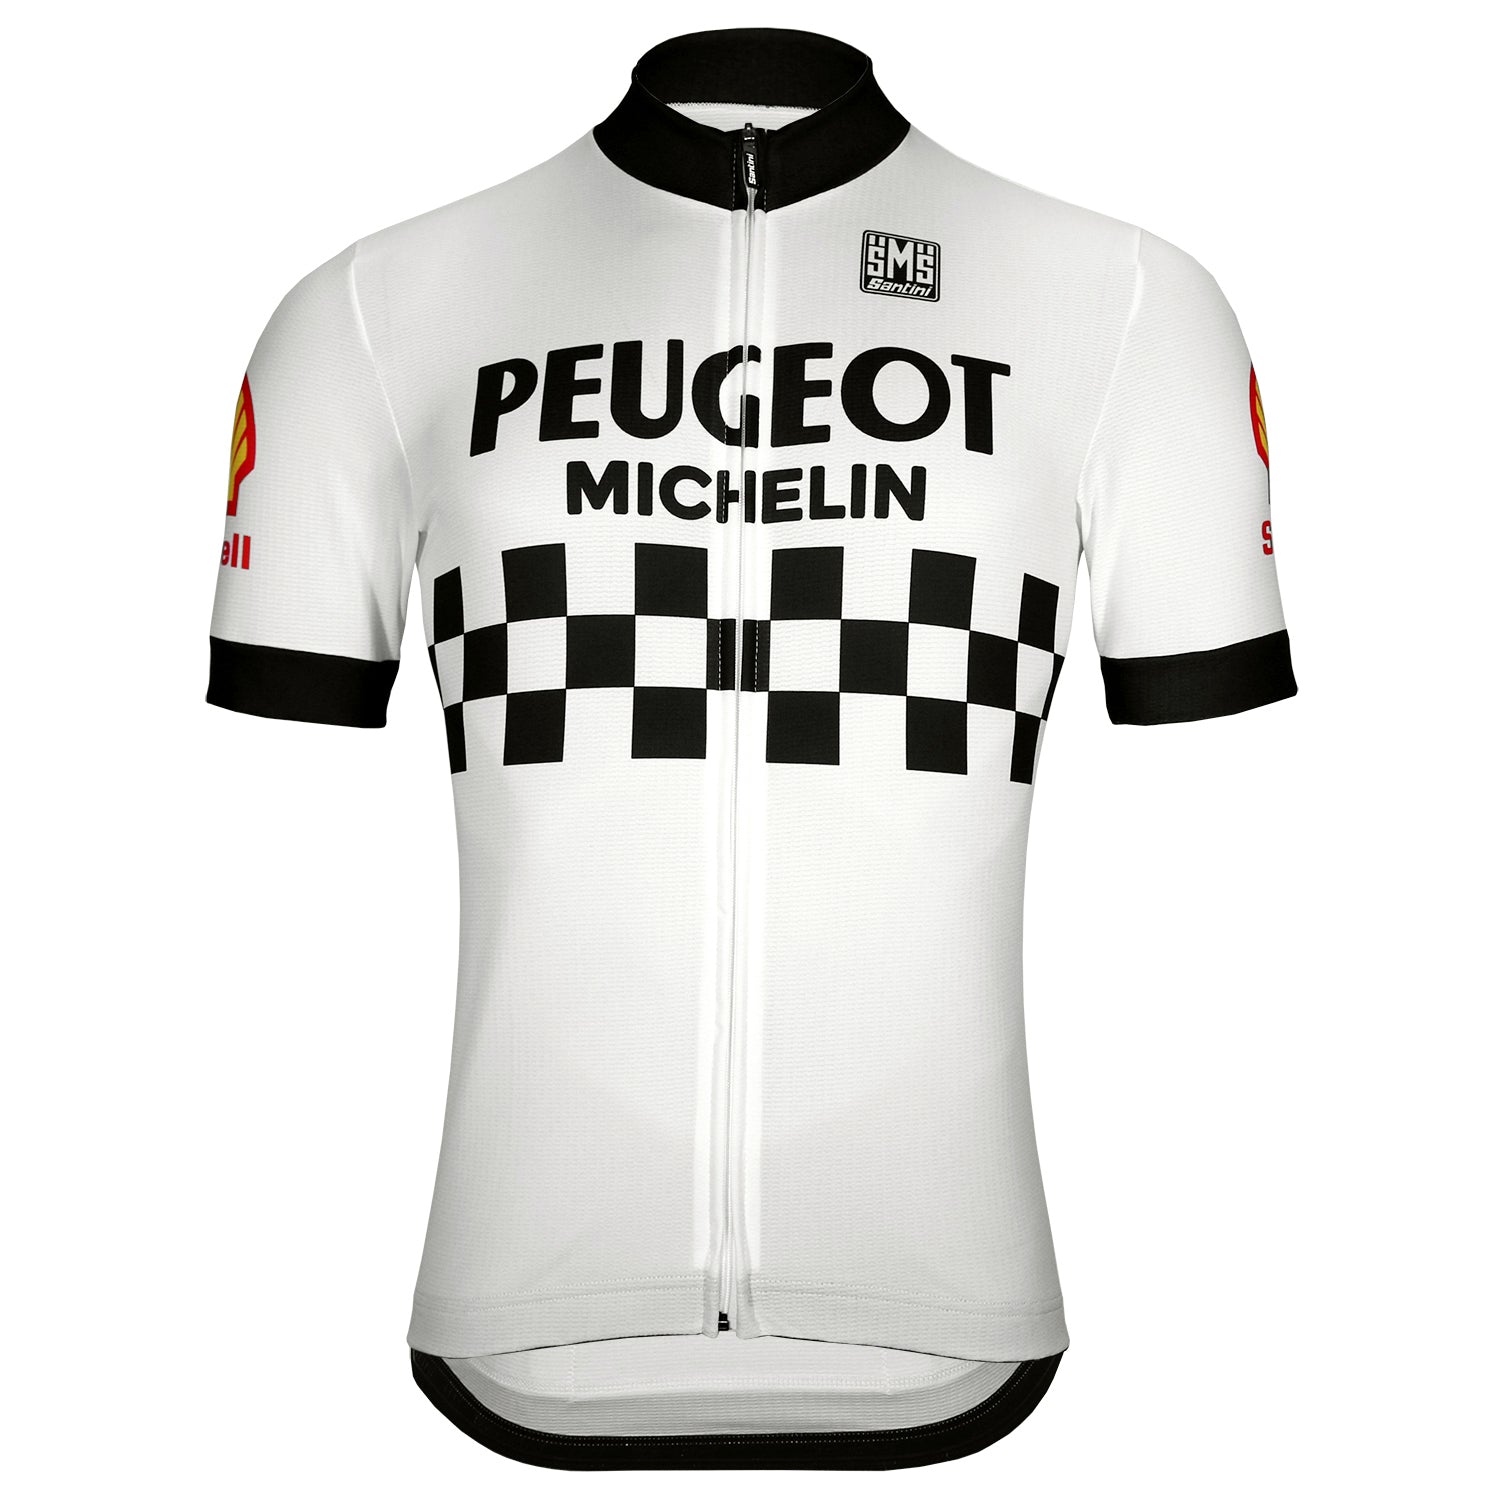 Peugeot Cycling Jersey, Peugeot Jerseys, Peugeot Checkerboard Clothing ...